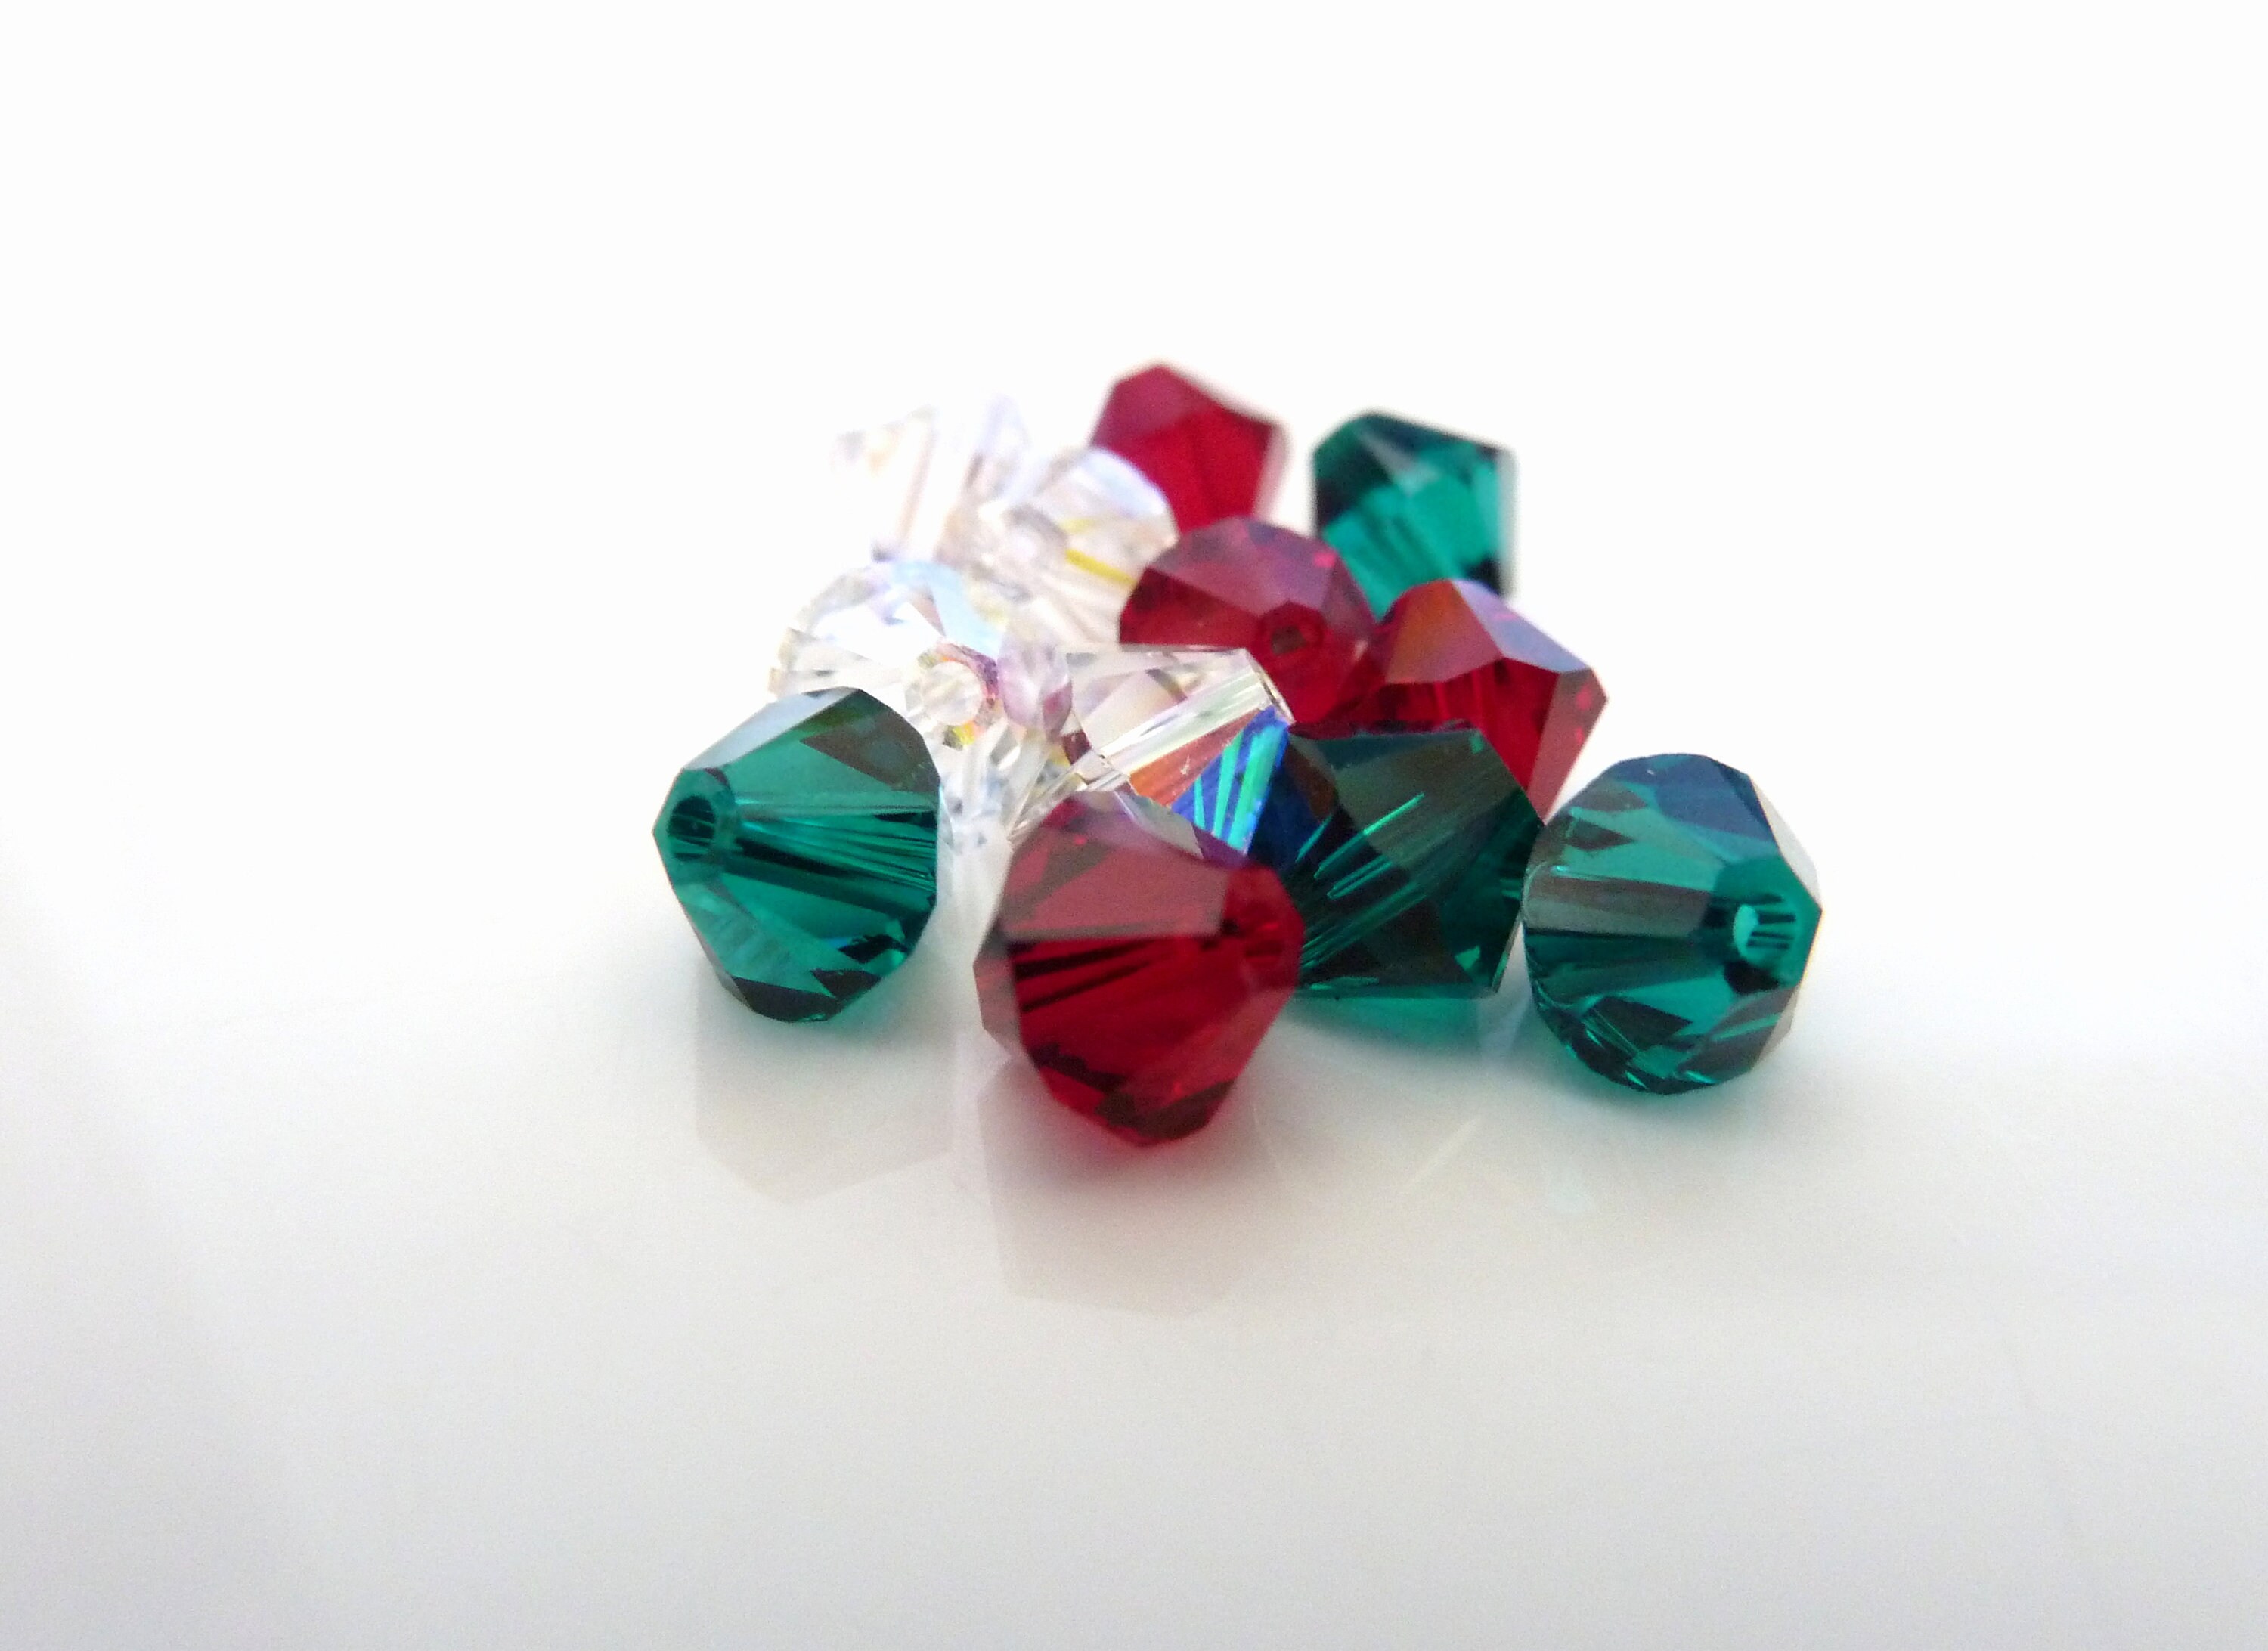 12 Pcs. Swarovski 6mm Christmas Blend Bicone Crystal Beads 5328 - 4 Of Each Color - Xmas Mixed Lot - Loose Crystals Jewelry Making Mix - Xb6B